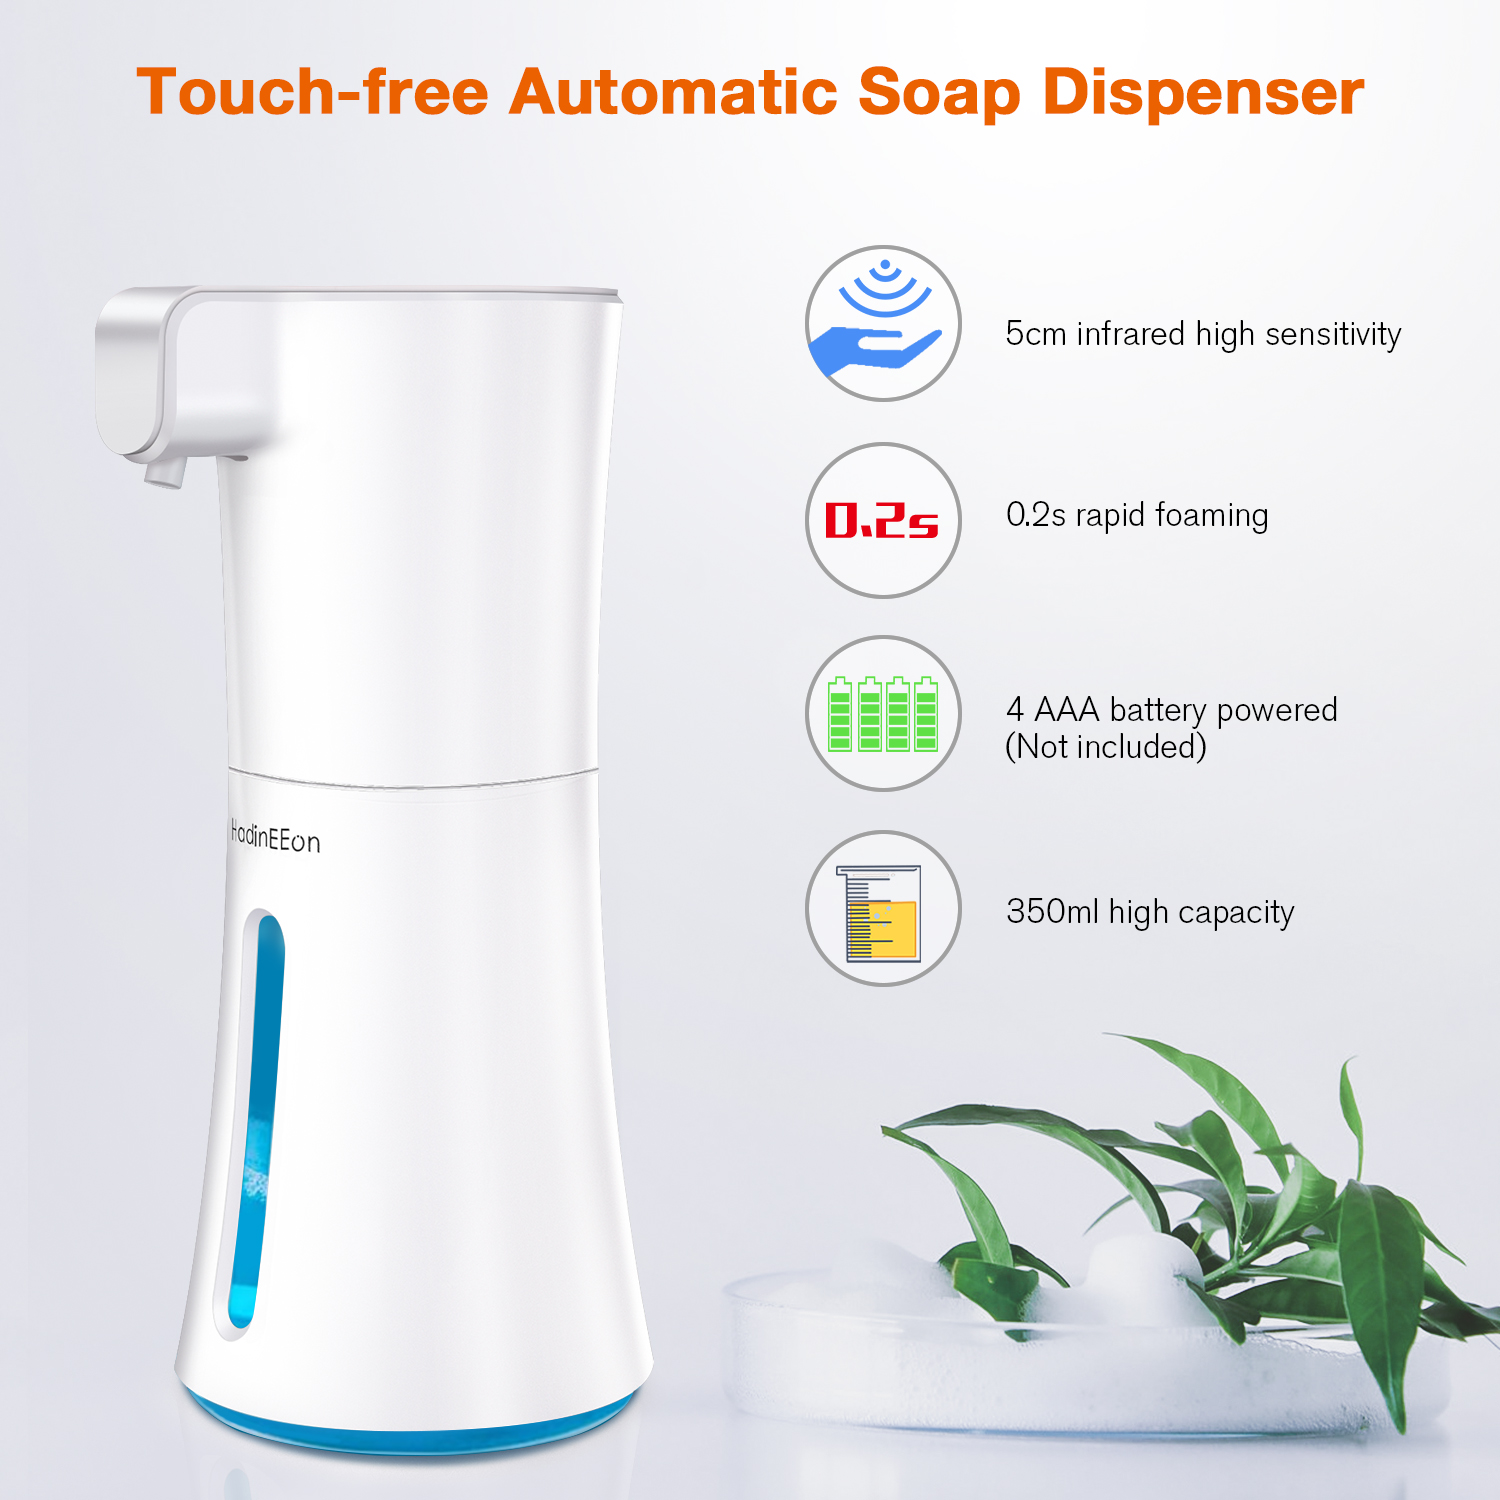 Automatic Foaming Soap Dispenser with Sensor for Kitchen, Bathroom (350ml for 600 hand washes) - image 5 of 8